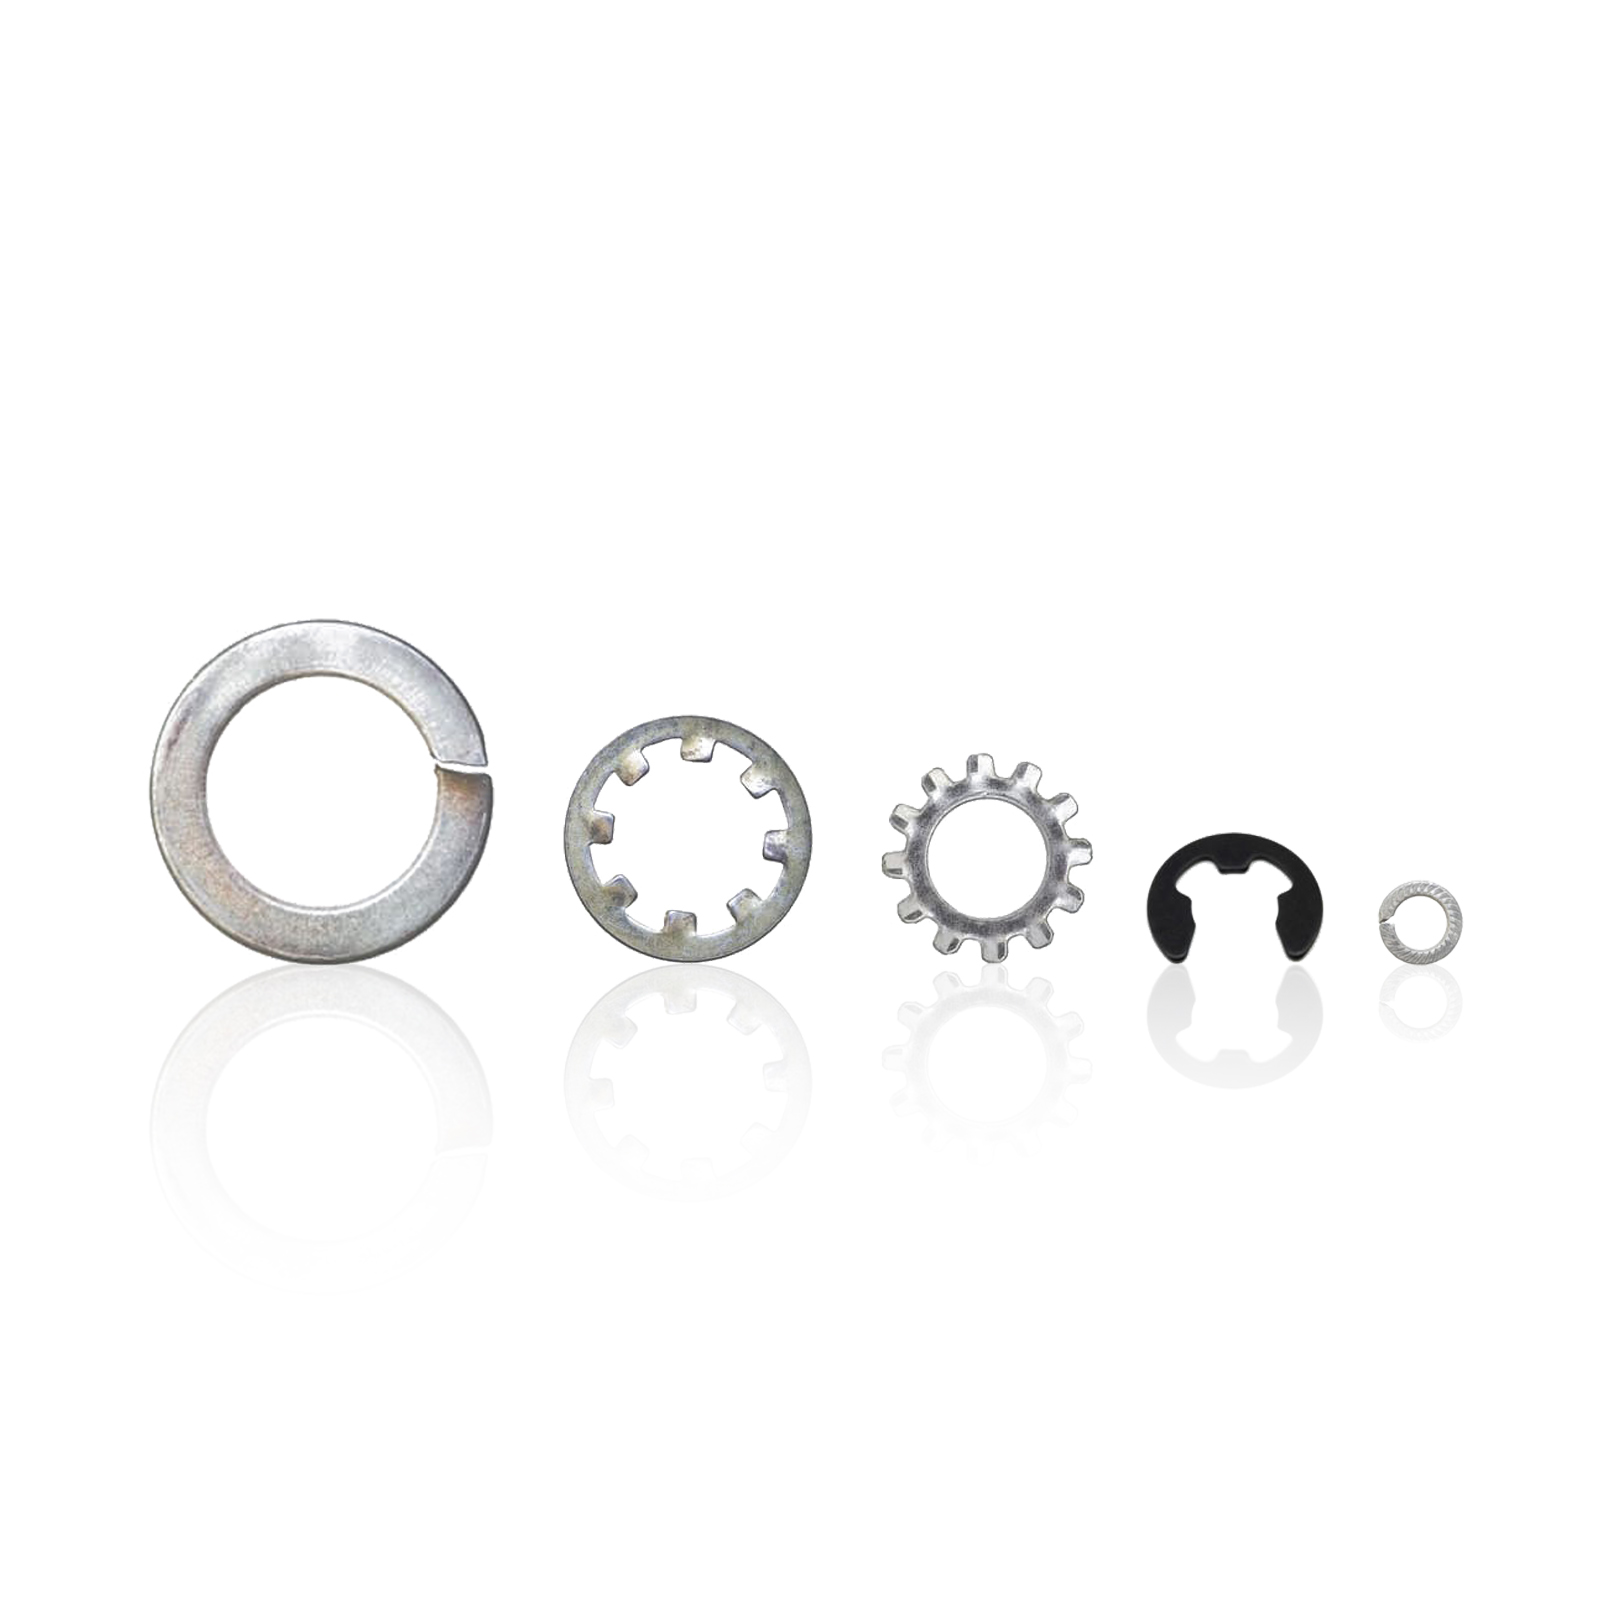 Washer & E Ring